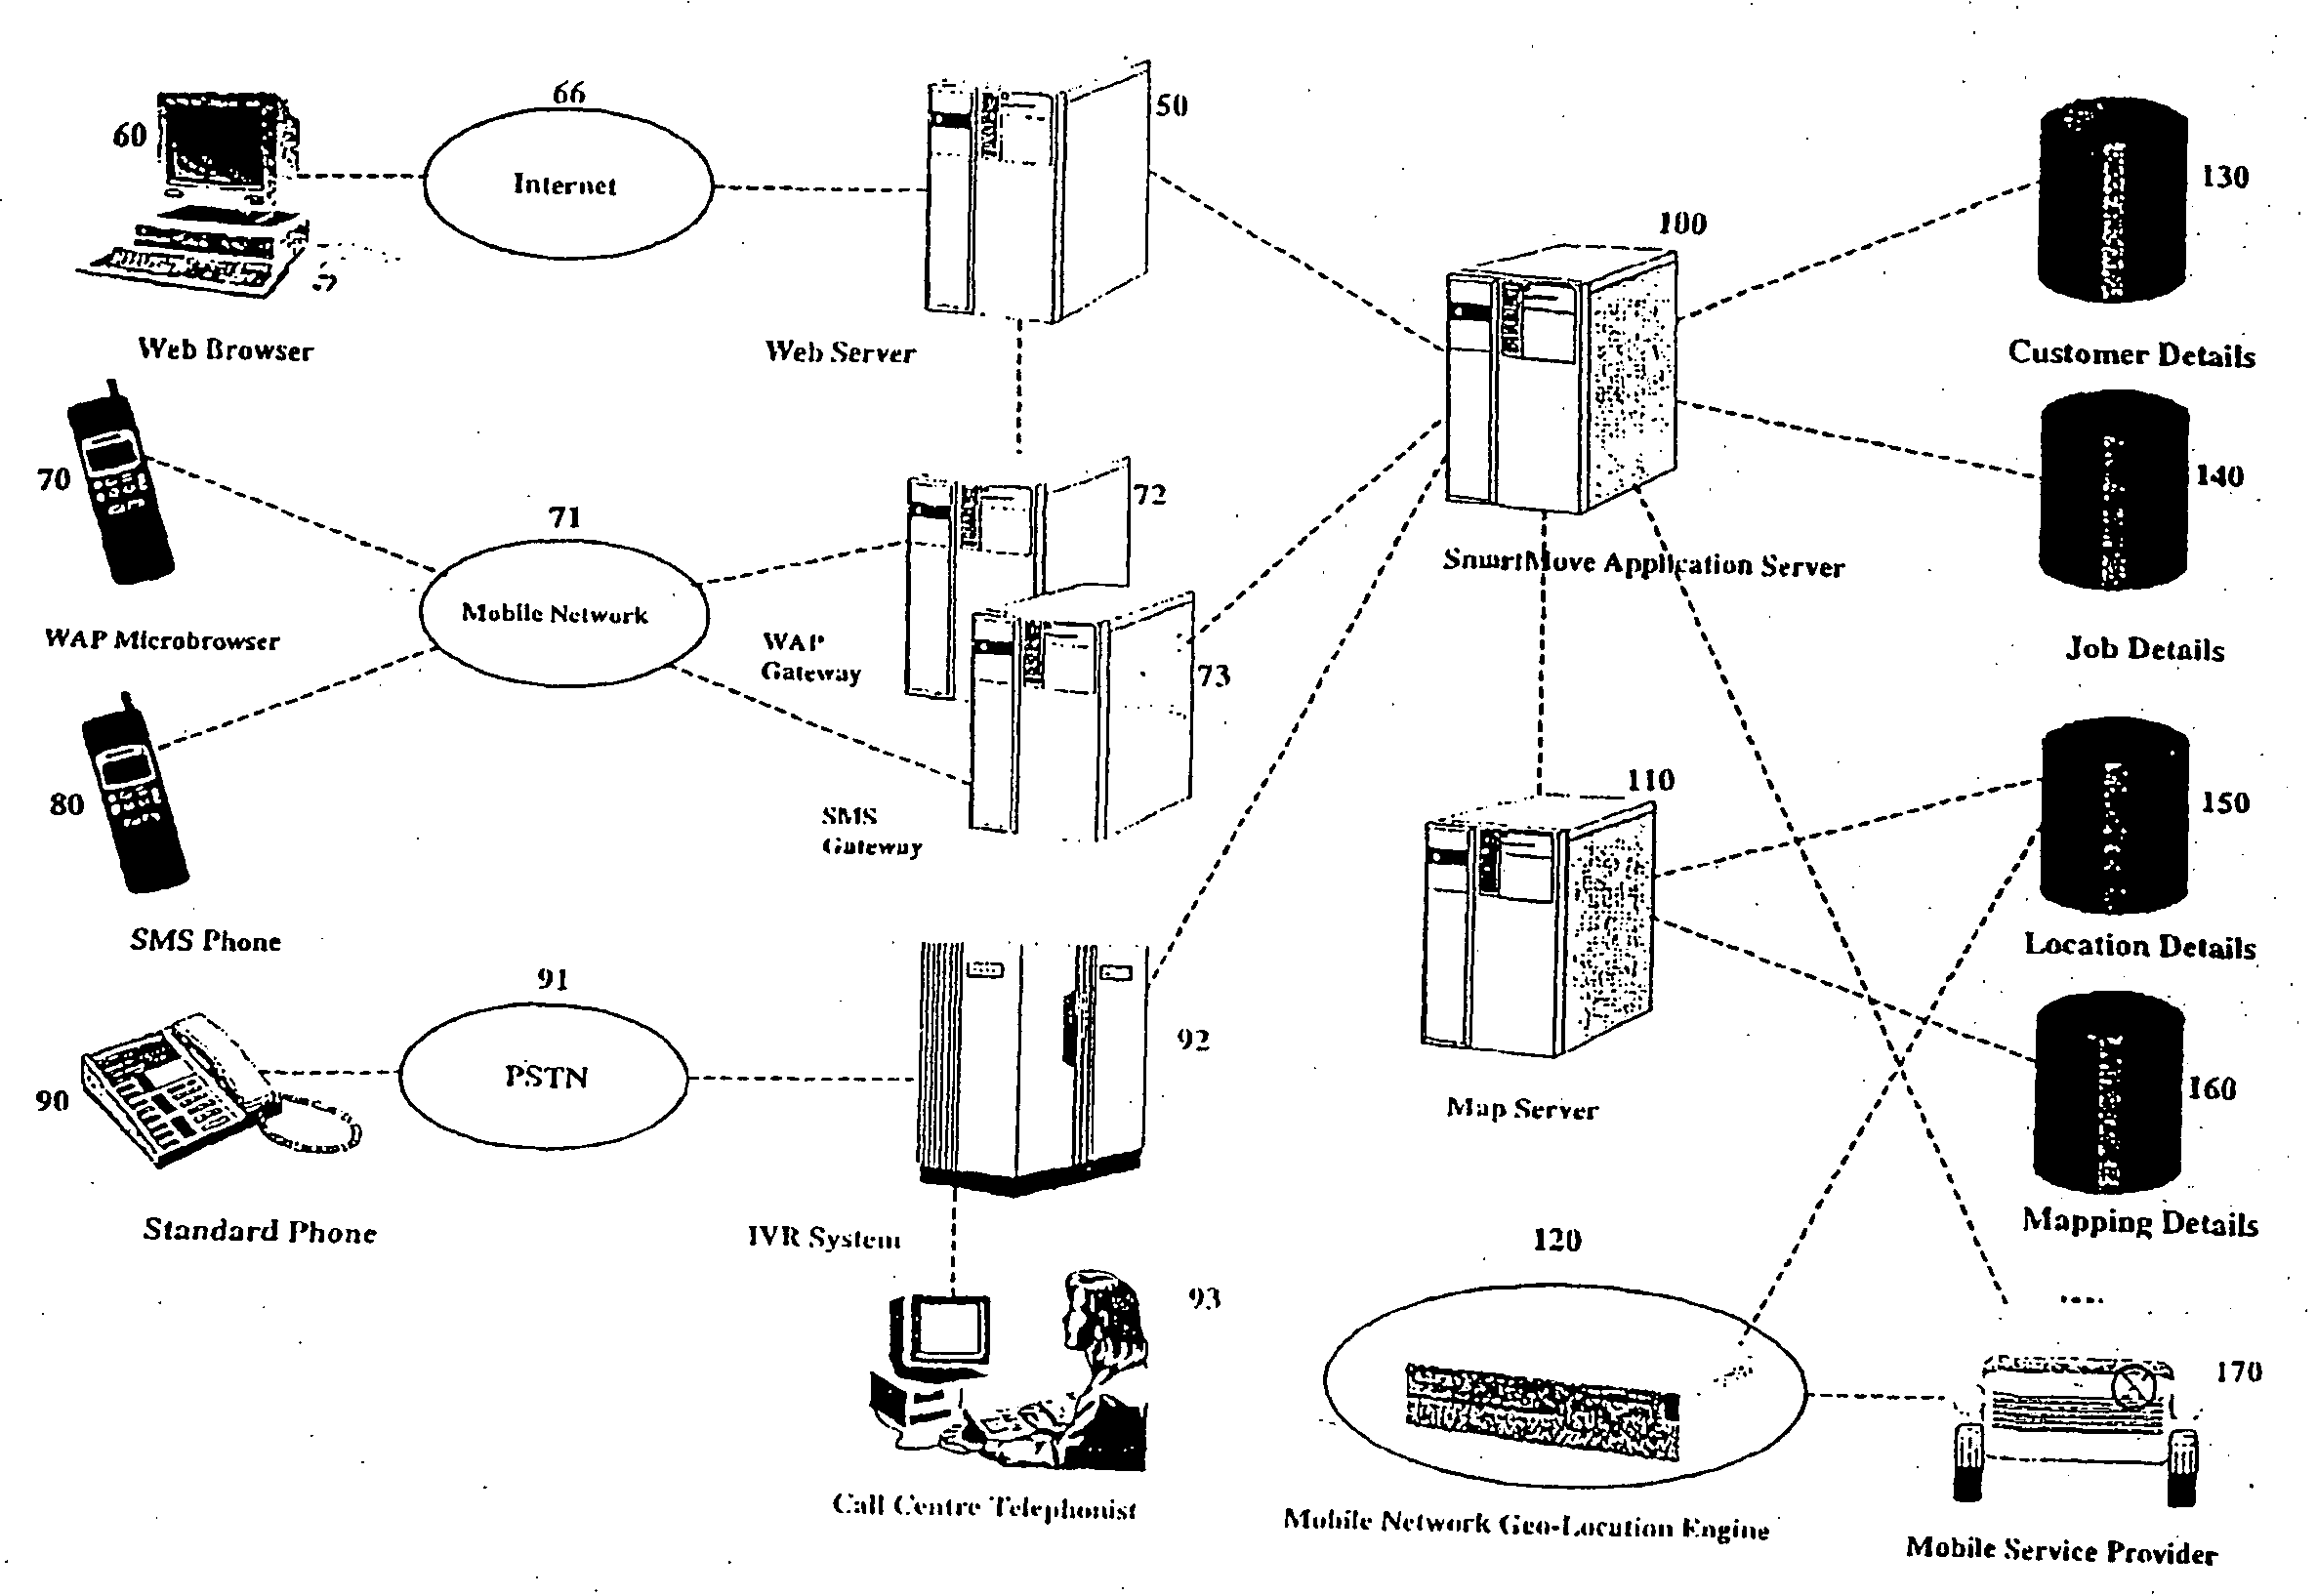 End user to mobile service provider message exchange system based on proximity